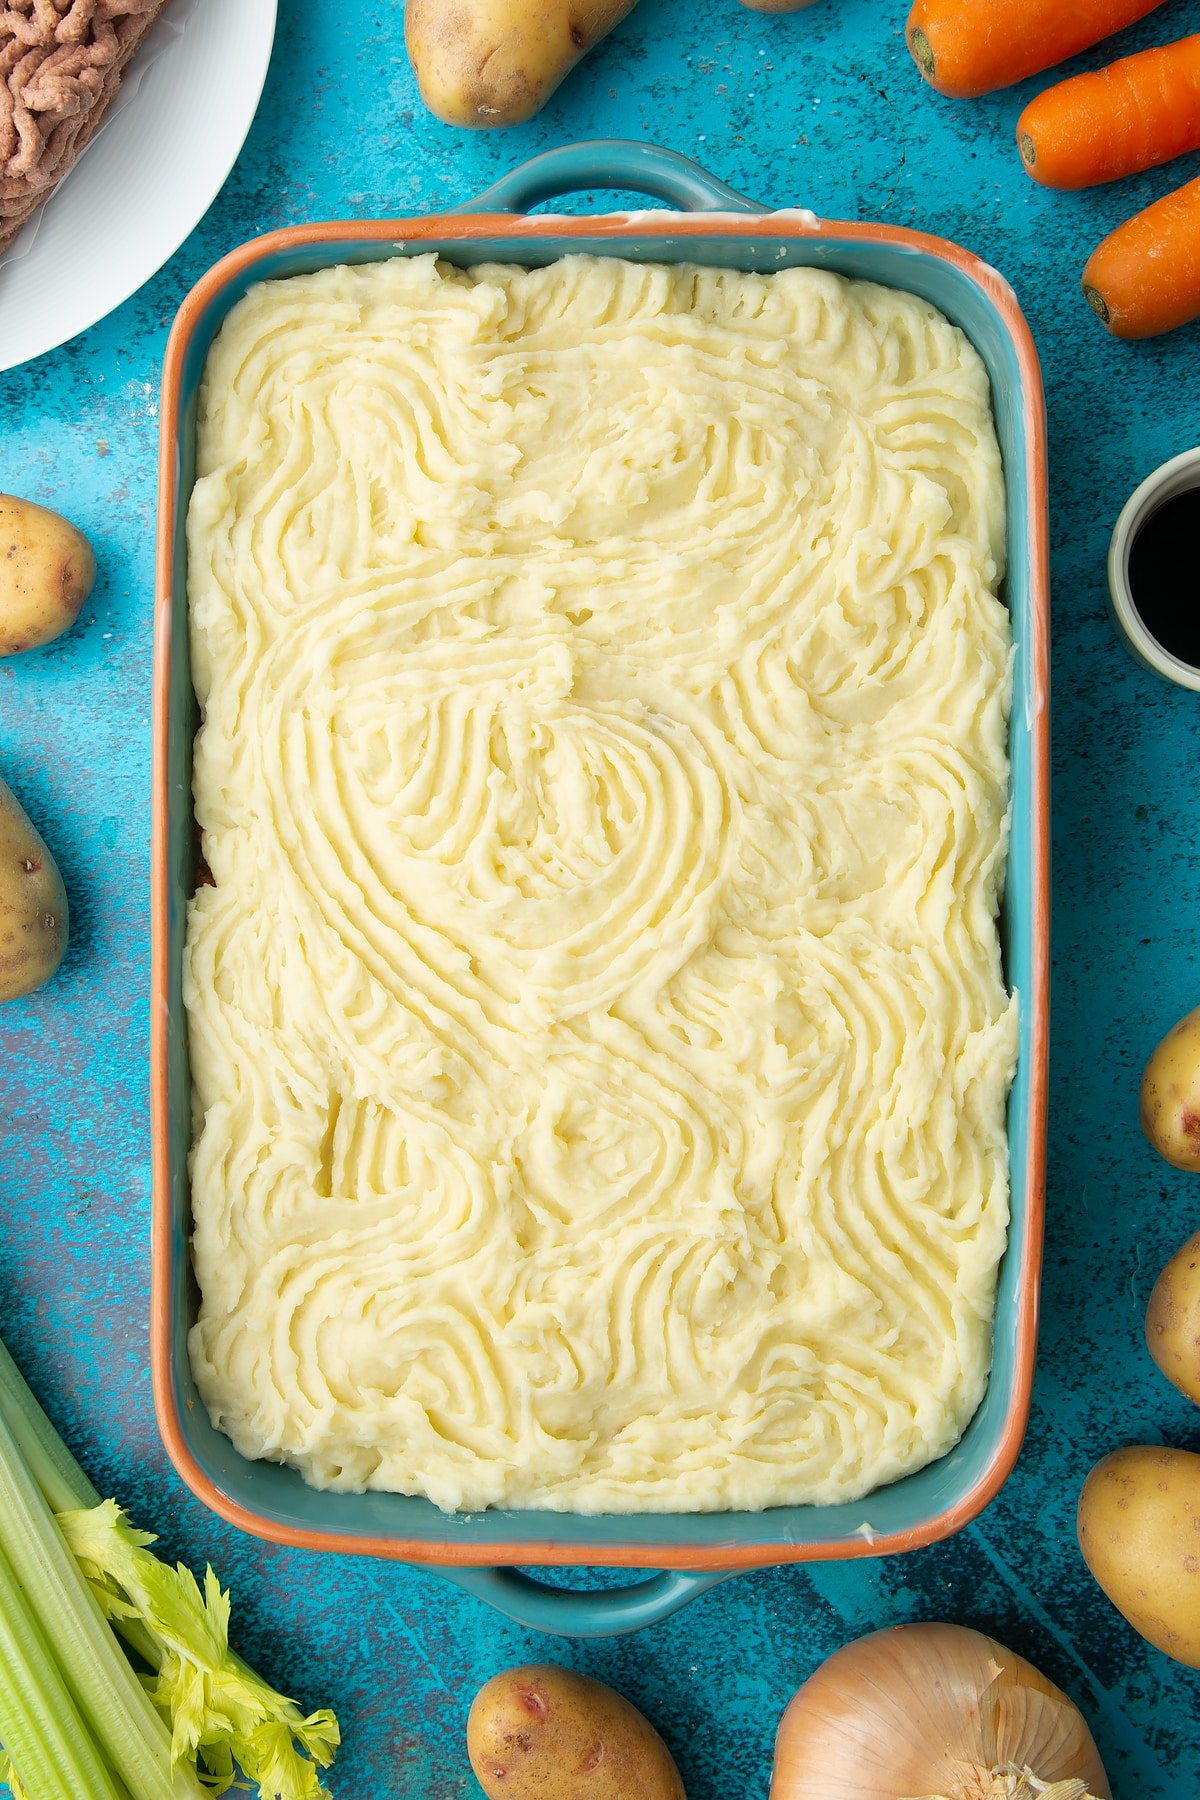 Meat free cottage pie filling topped with mashed potato in a roasting dish. The potato has been textured with a fork. Ingredients to make vegan cottage pie surround the dish.